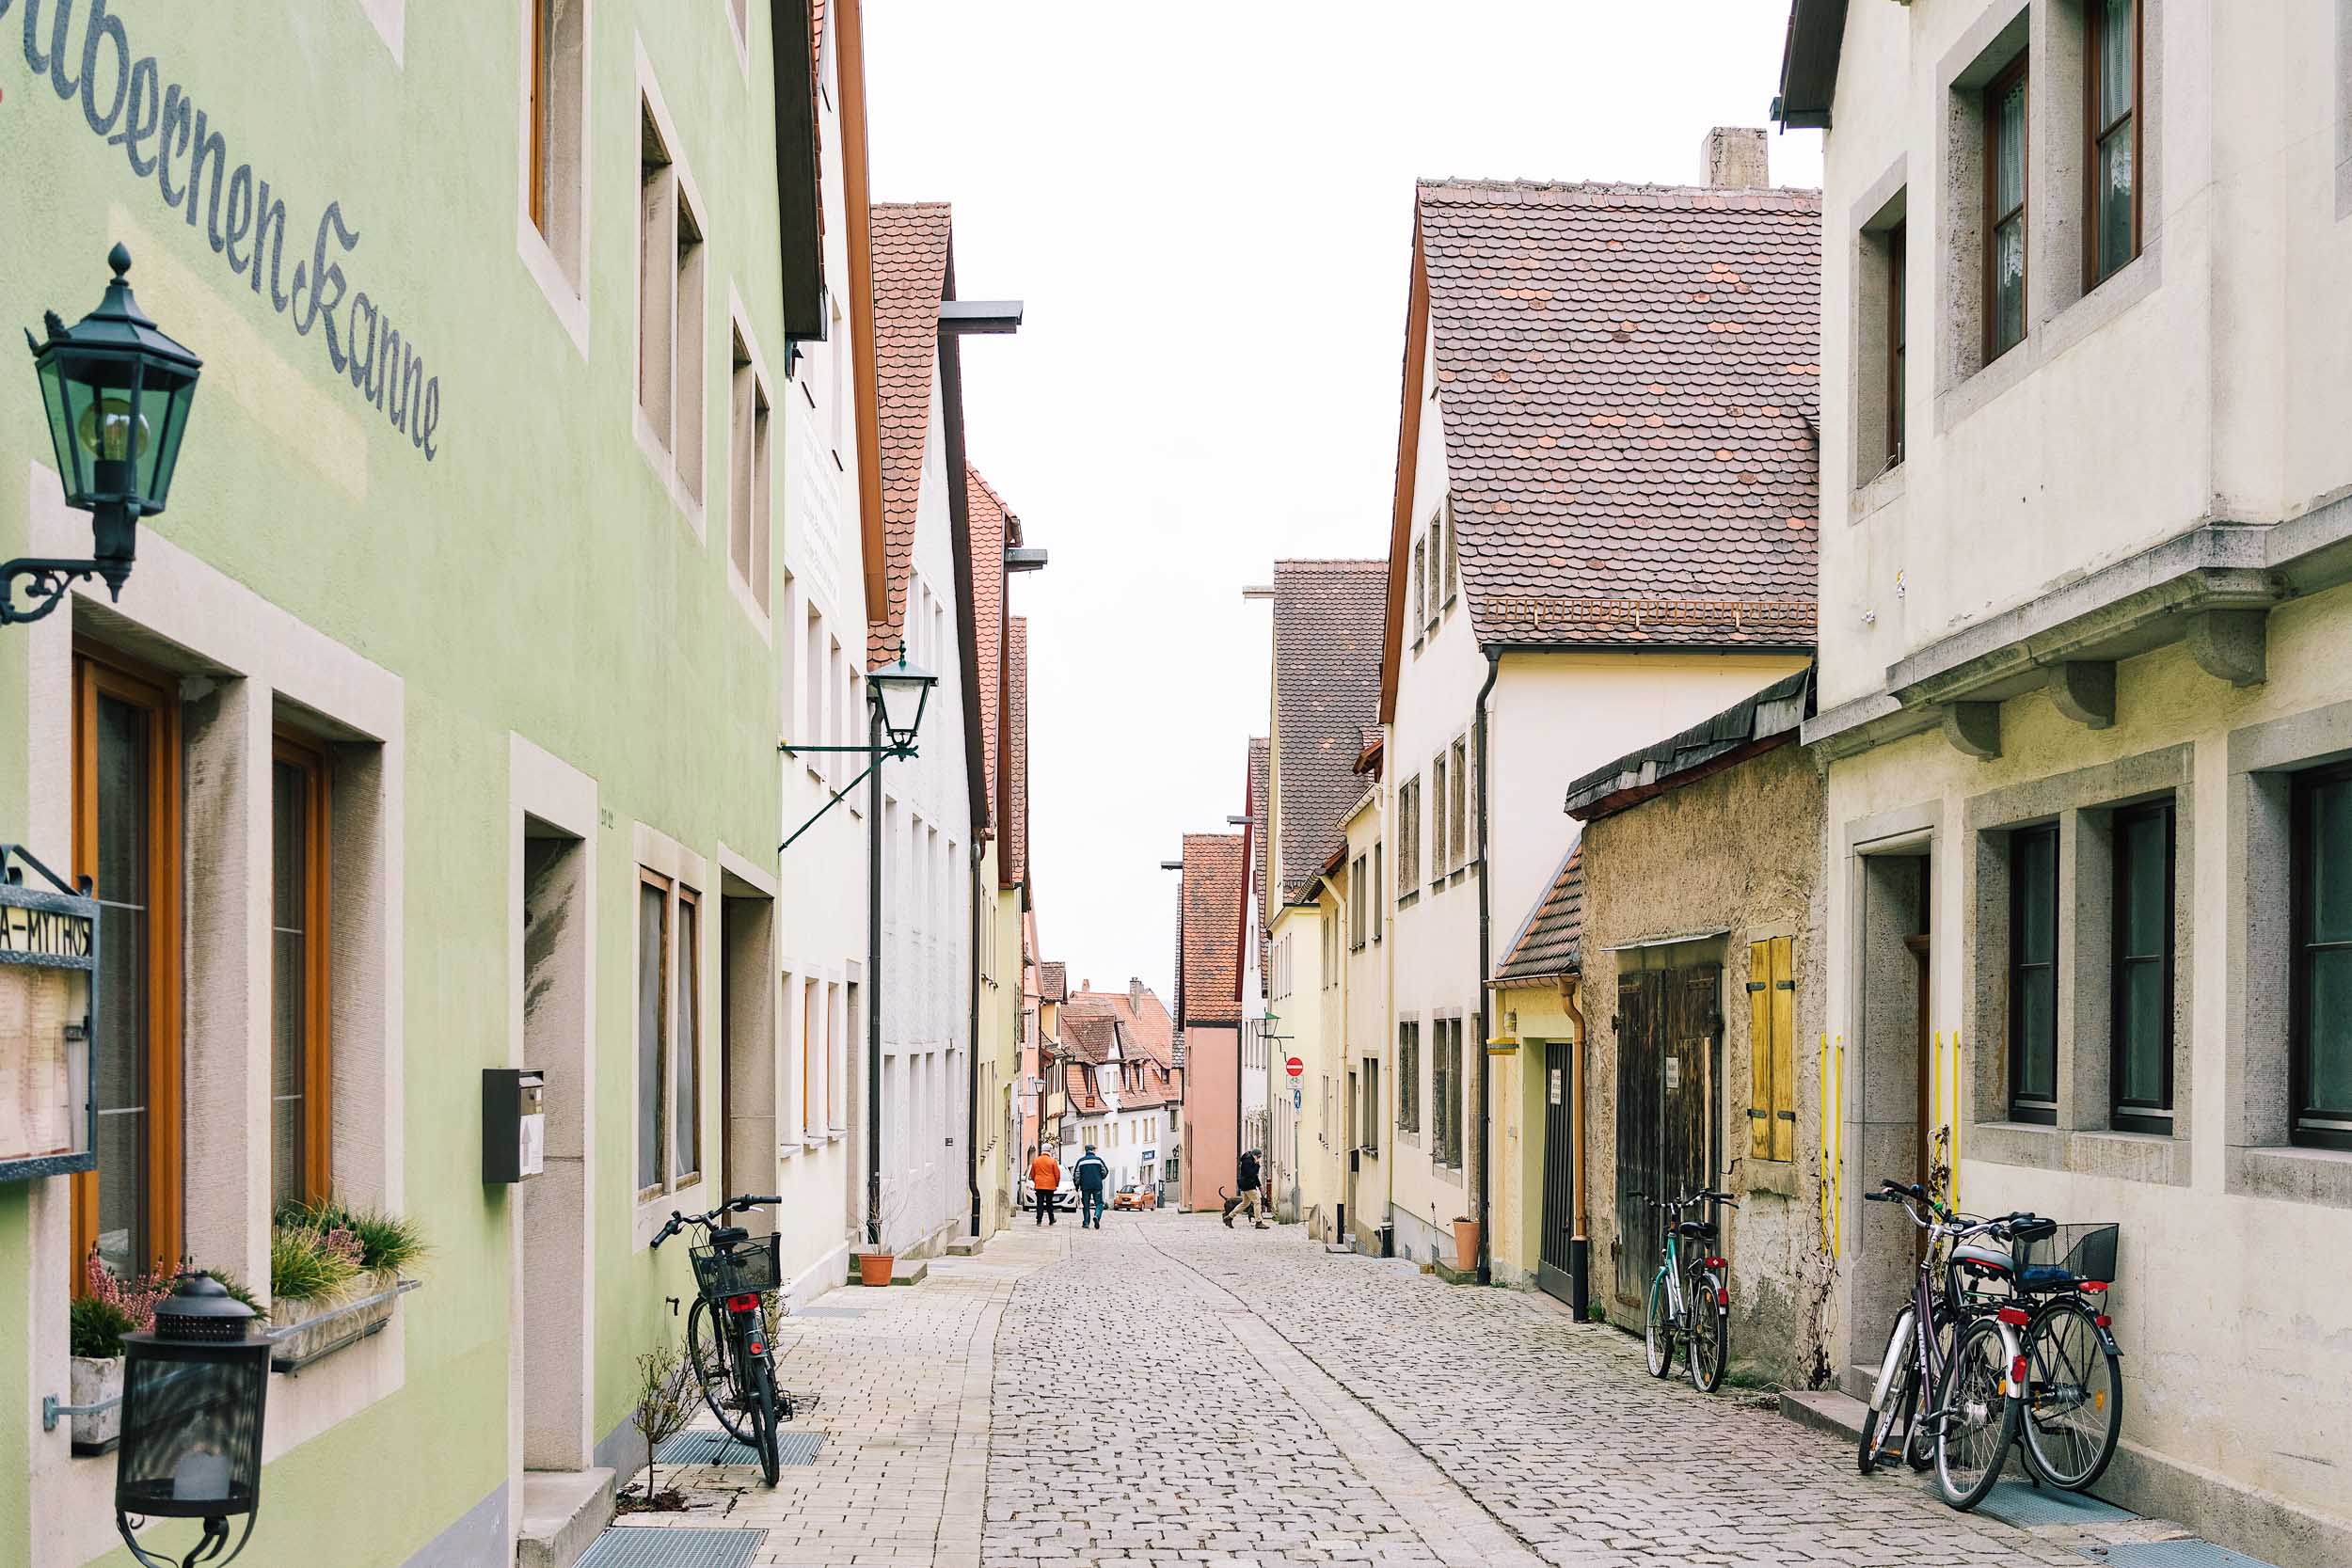 A picturesque street in Rothenburg